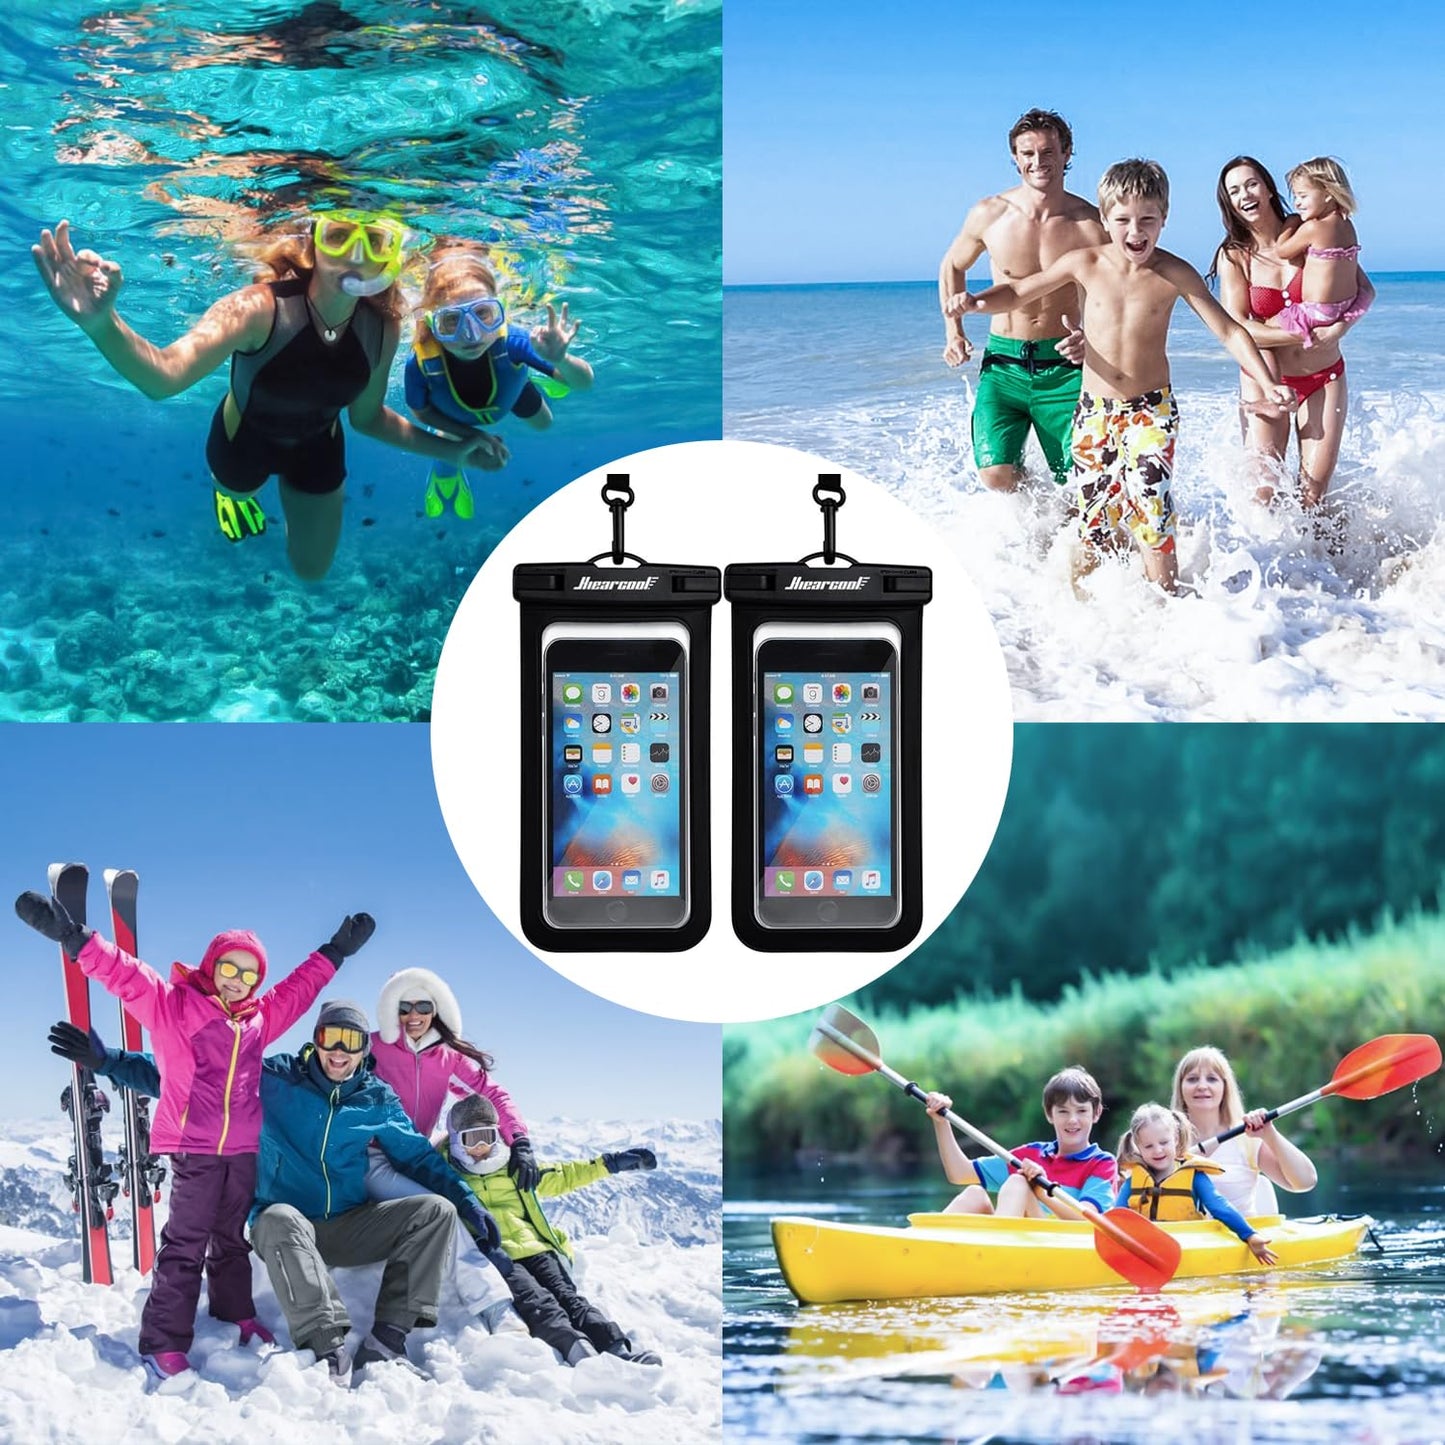 Hiearcool Waterproof Phone Pouch, Waterproof Phone Case for iPhone 15 14 13 12 Pro Max, IPX8 Cellphone Dry Bag Beach Cruise Ship Essentials 2Pack-8.3"